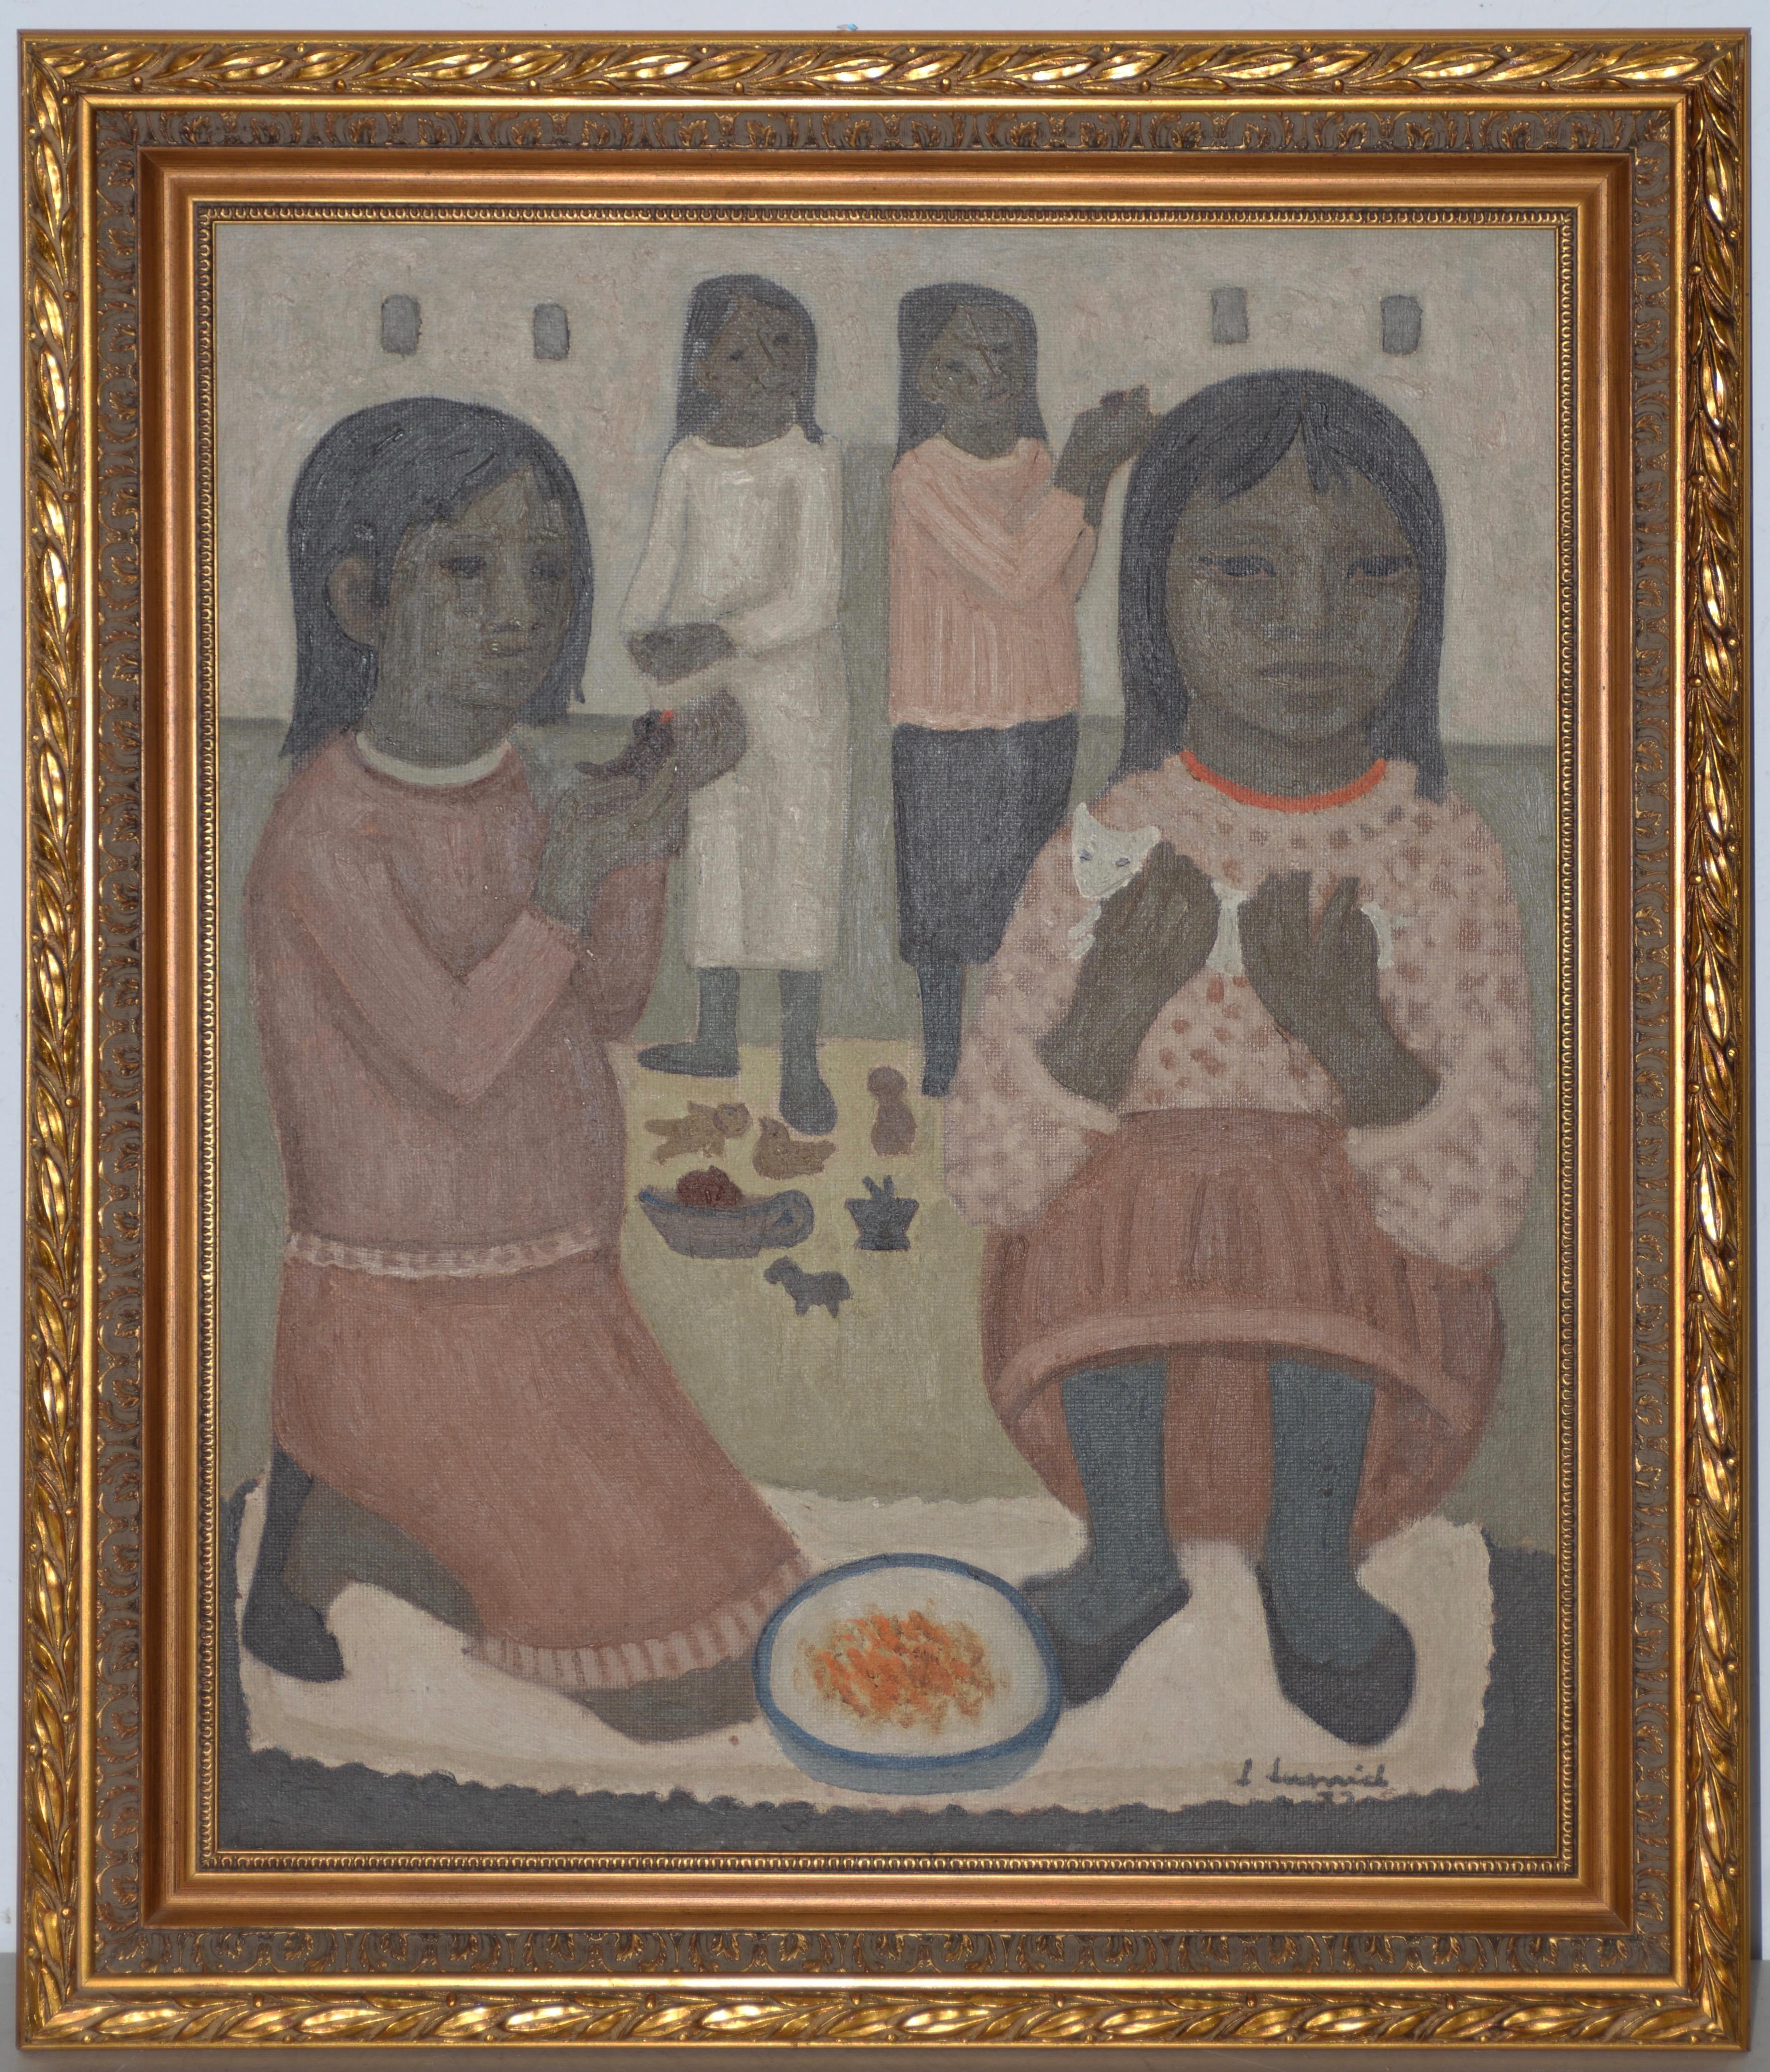 Luis Lusnich (Italy / Argentina, 1911-1995)

Wonderful mid modern oil painting of four young girls playing with birds and a white cat.

Original oil on masonite. Dimensions 20" x 24". The frame measures 25" x 29".

The painting is in excellent